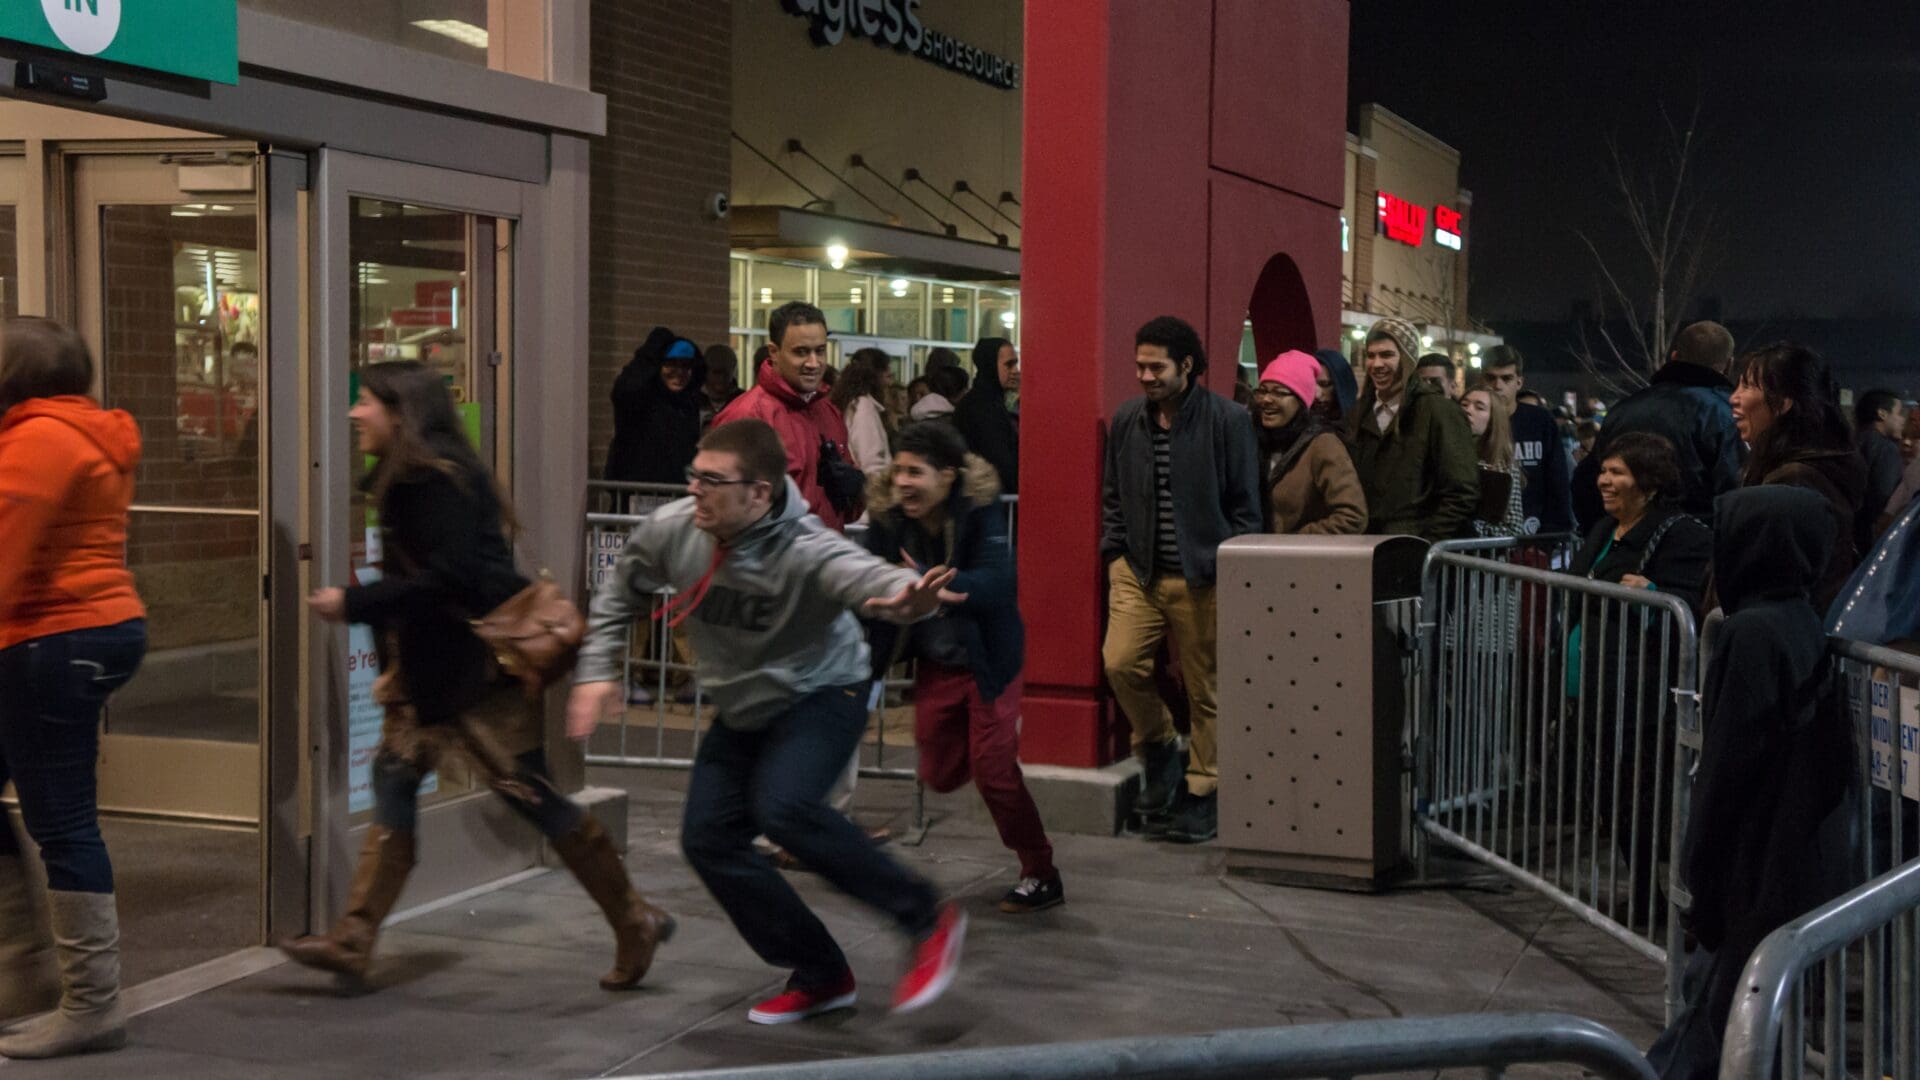 Shoppers rush into a store in Laramie, Wyoming as it opens on Black Friday in 2013.